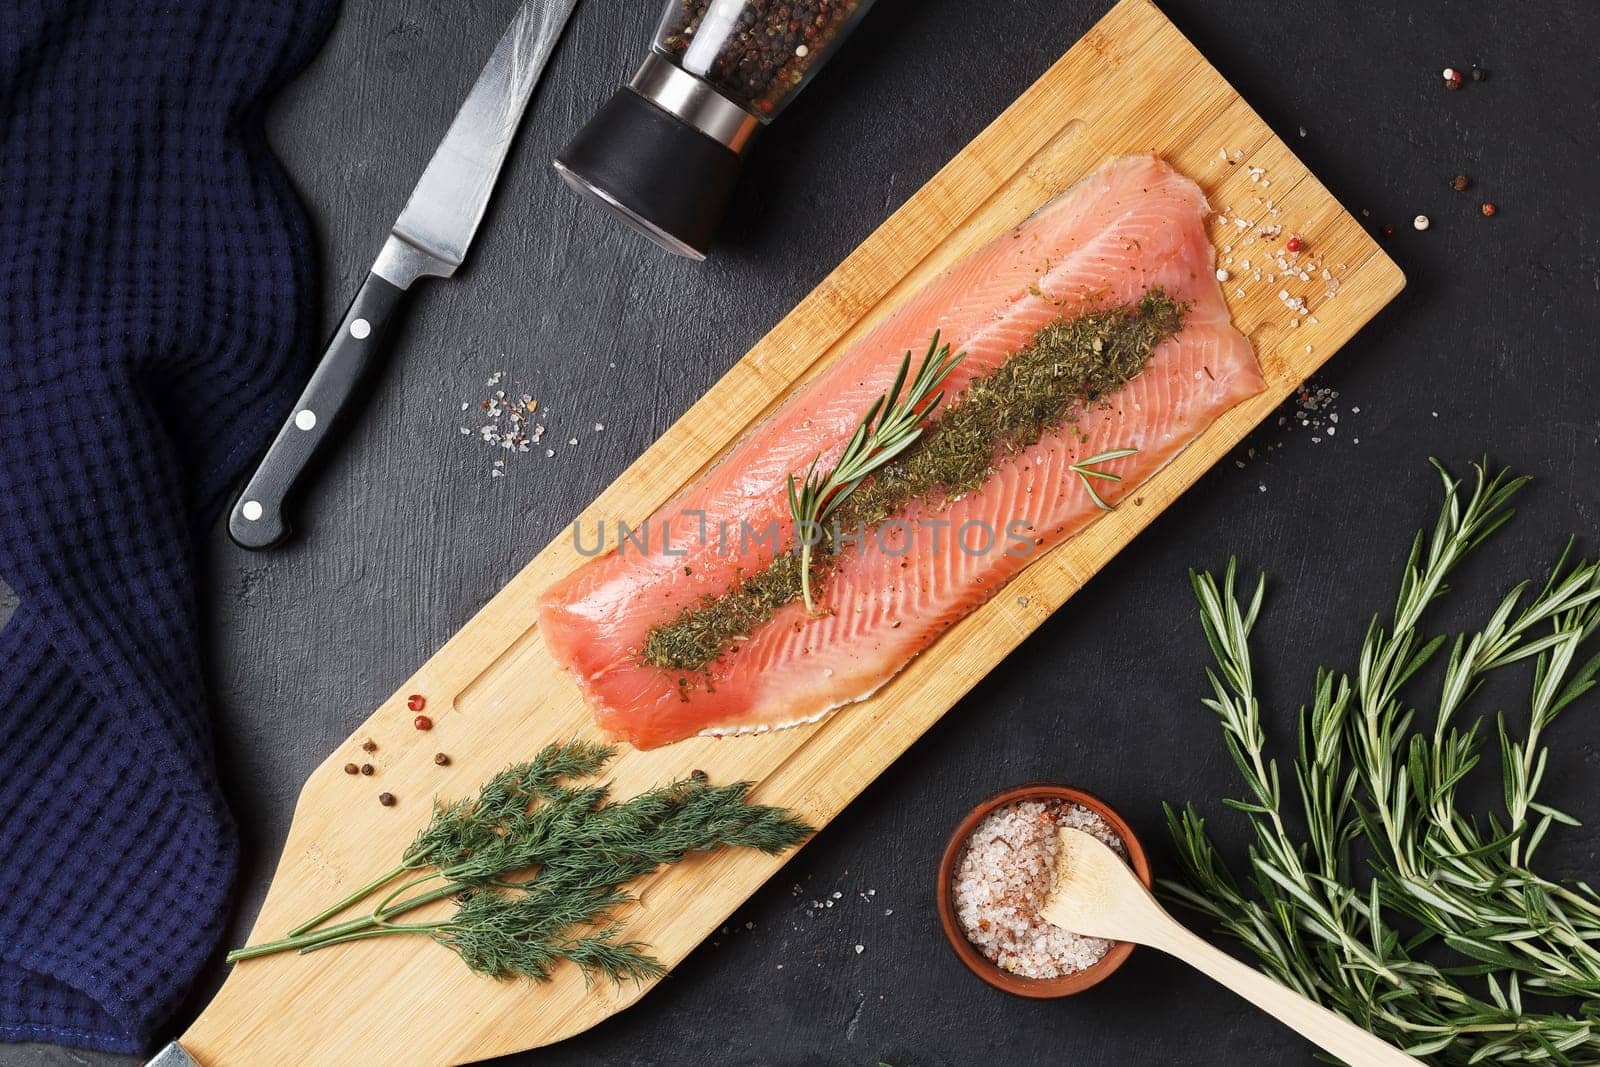 Salted fish fillet with spices and herbs:dill and rosemary on a wooden board on a black background.